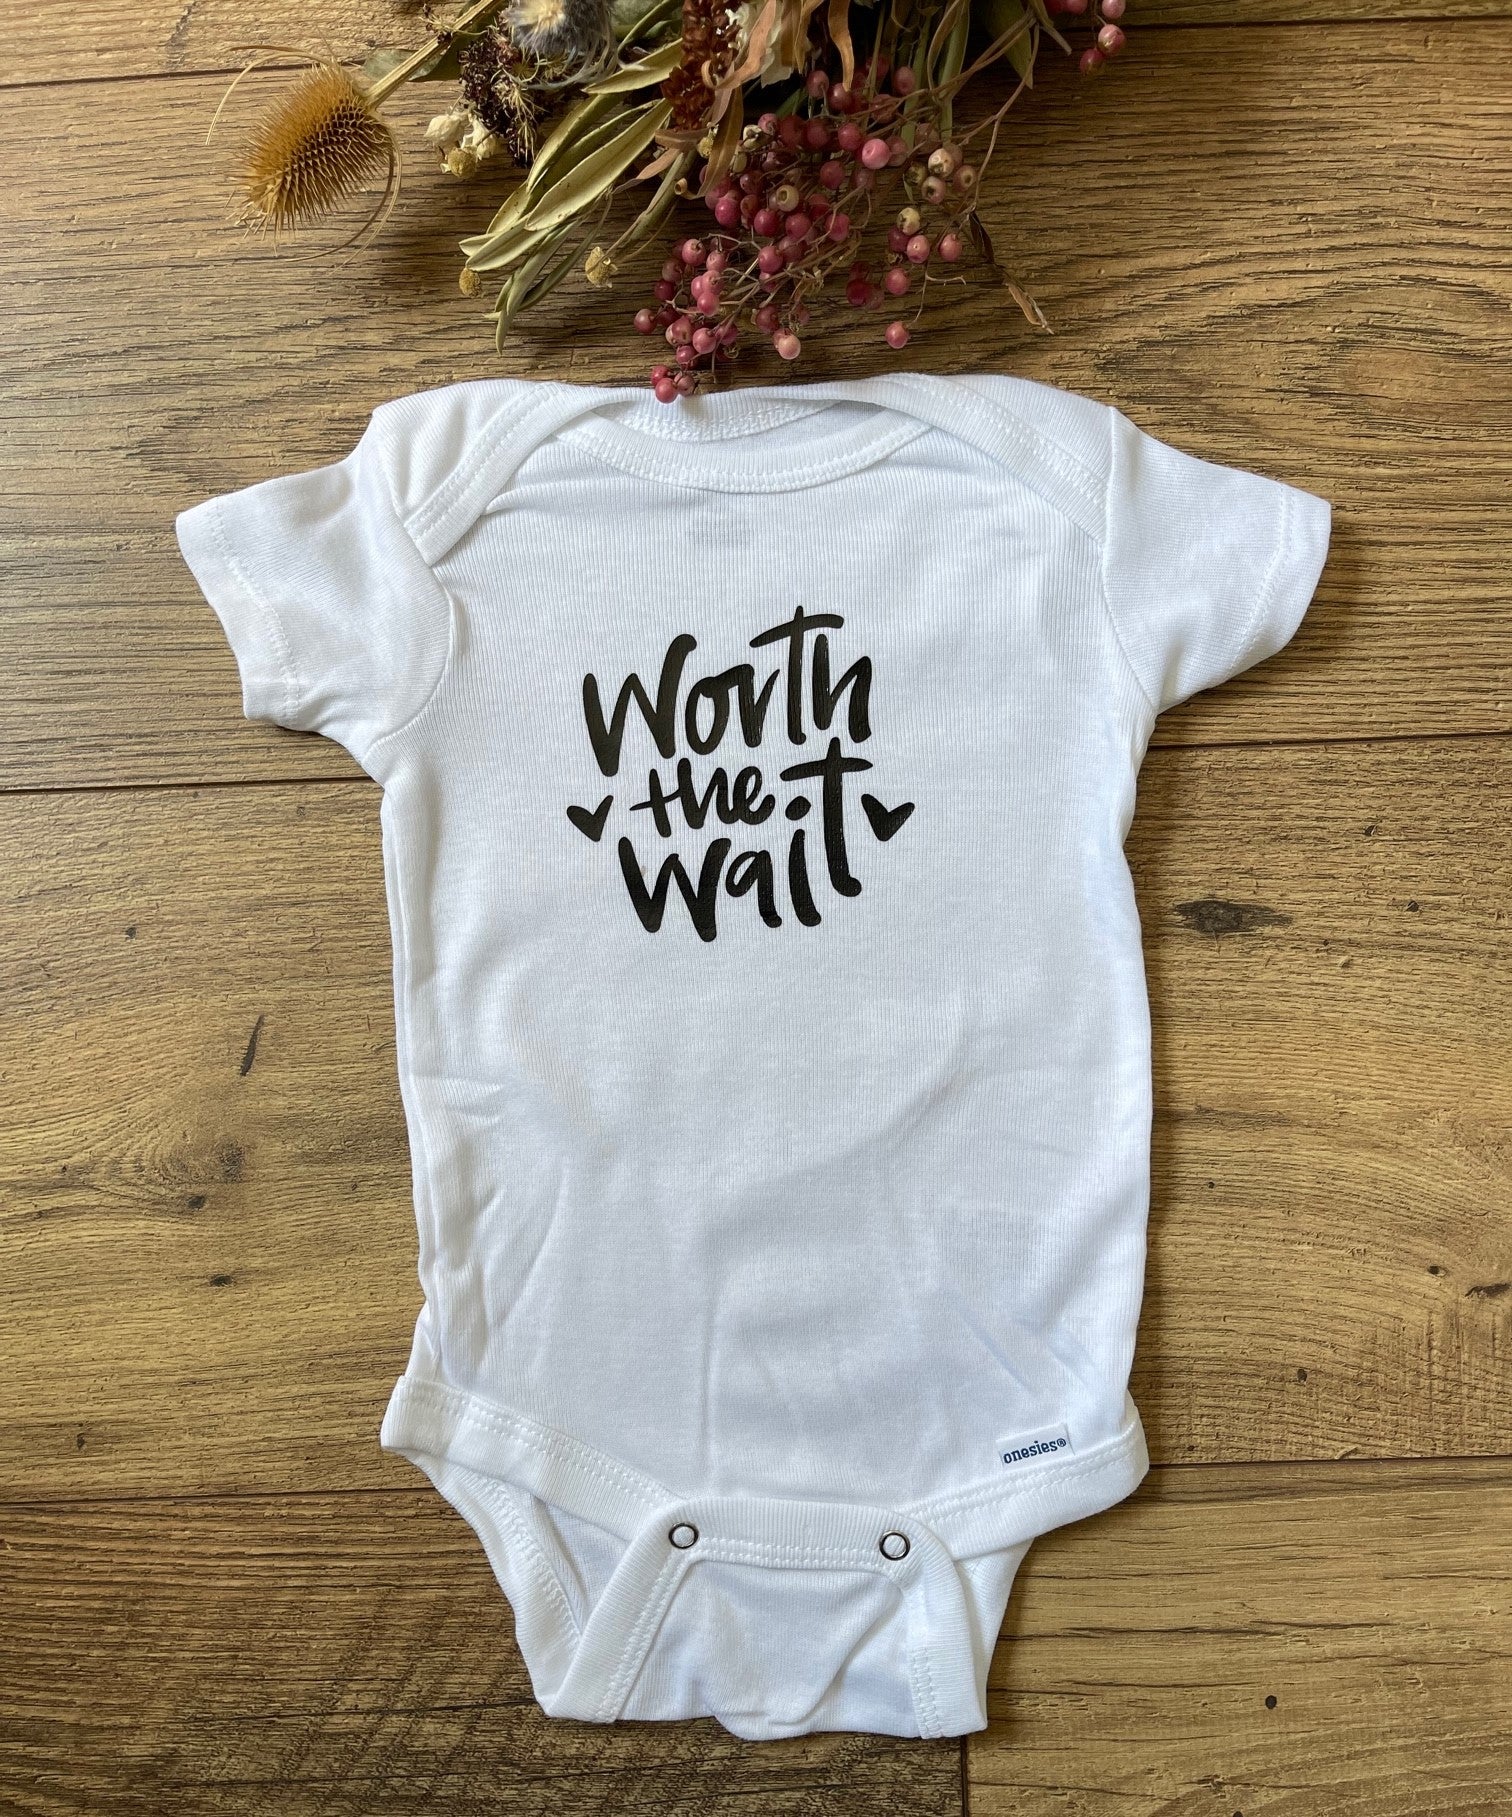 WORTH THE WAIT Boys and Girls Infant Baby Onesie